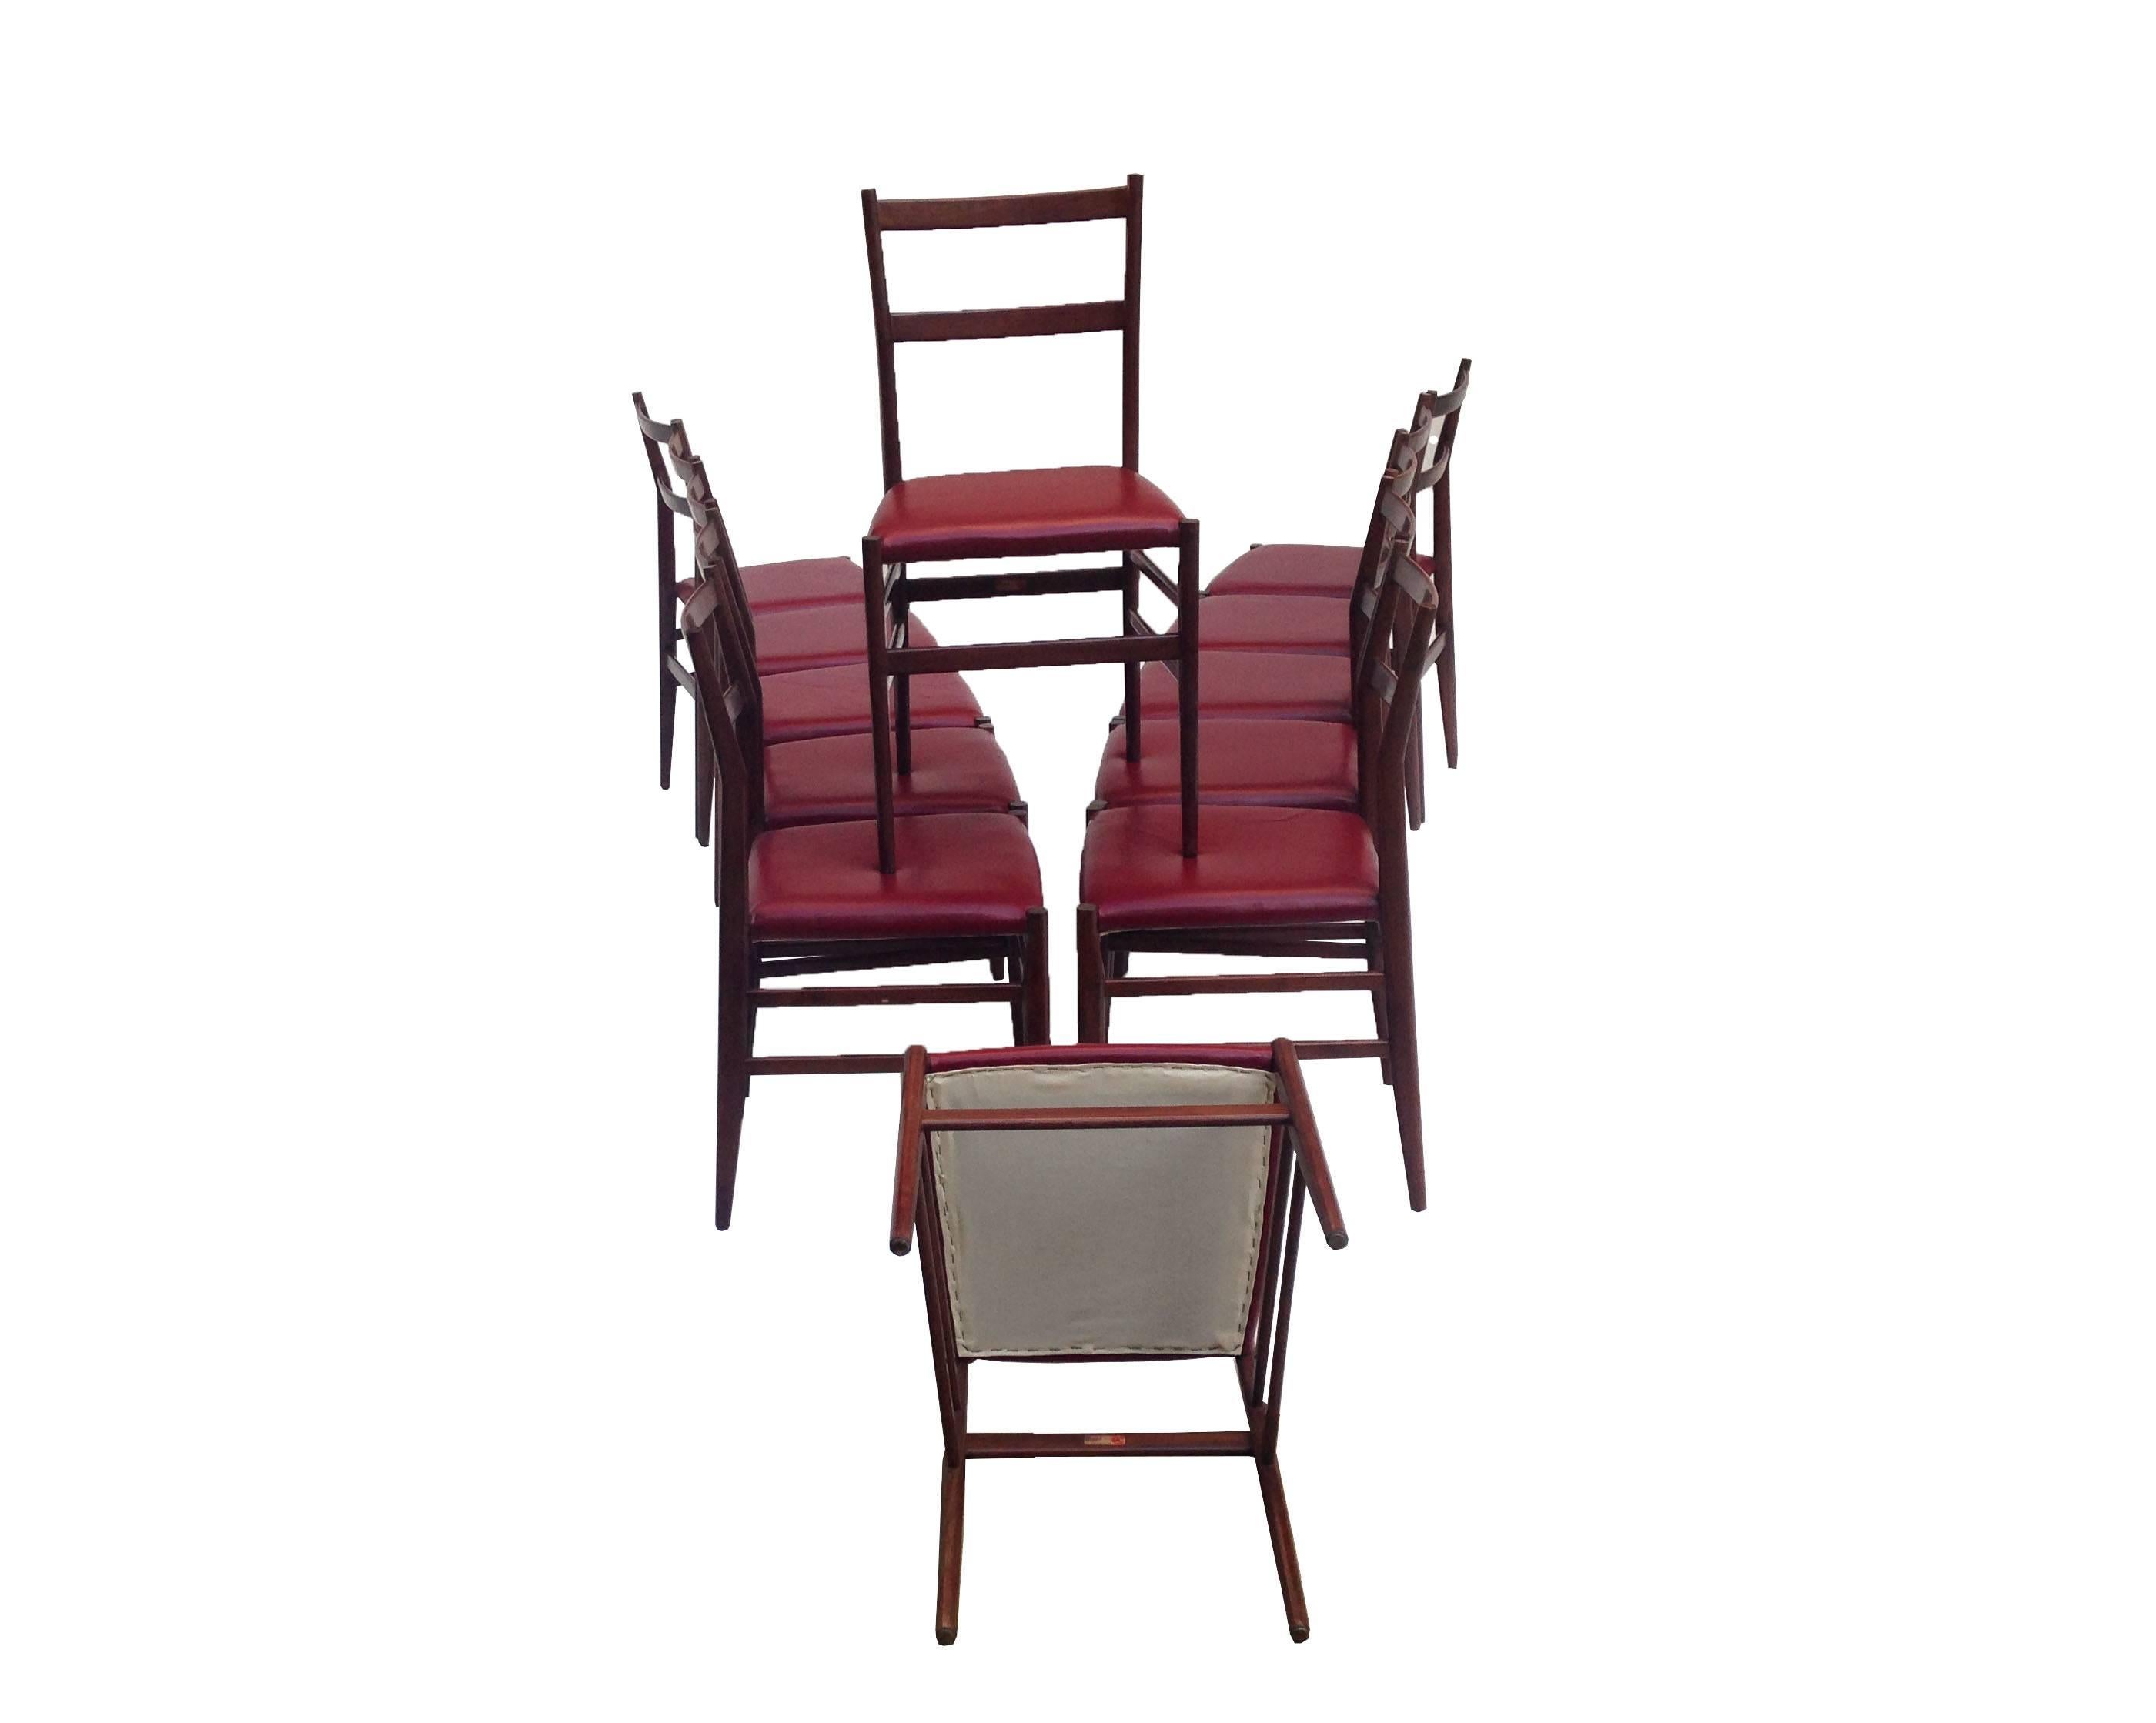 12 chairs Leggera of Gio Ponti
Set of chairs, model «leggera»
Manufactured by Cassina
Italy,1952 (all signed)
Materials: Wood, leather 
Measurements : 83 x 46 x 42 cm. (32.7 x 18.1 x 16.5 in.)


Condition: excellent; The color and the